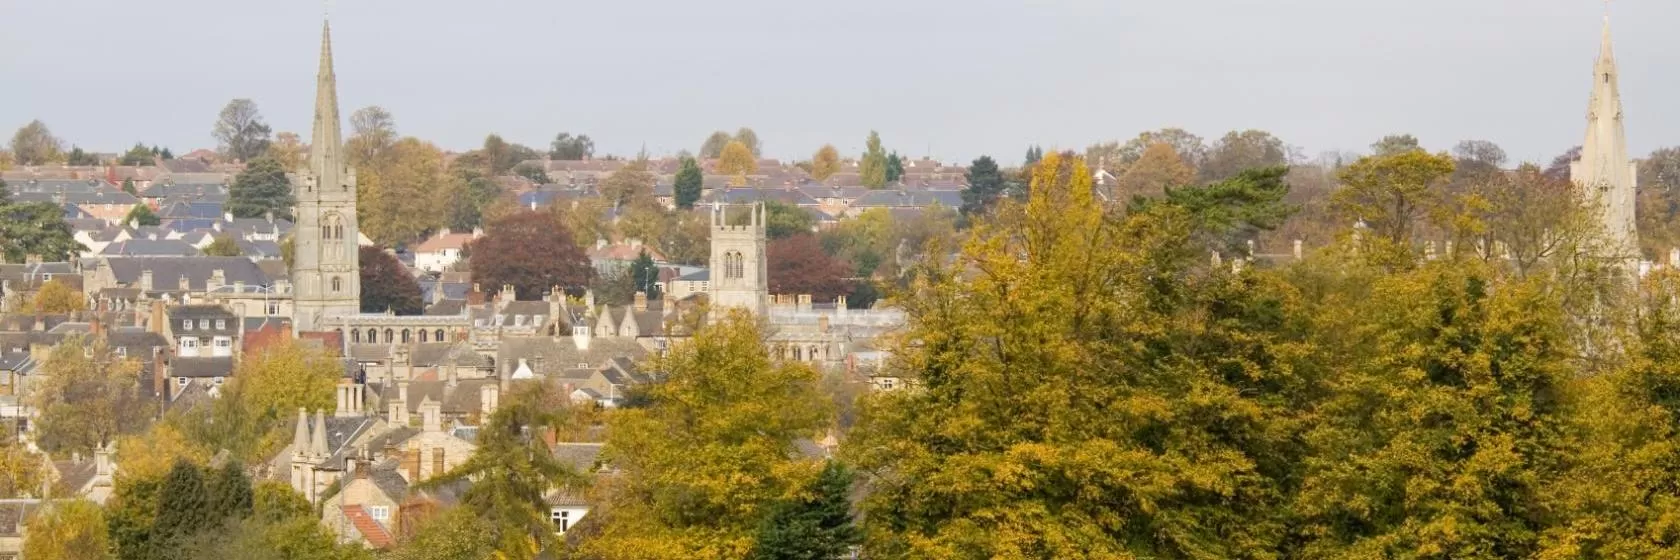 Stamford, Lincolnshire Hotels